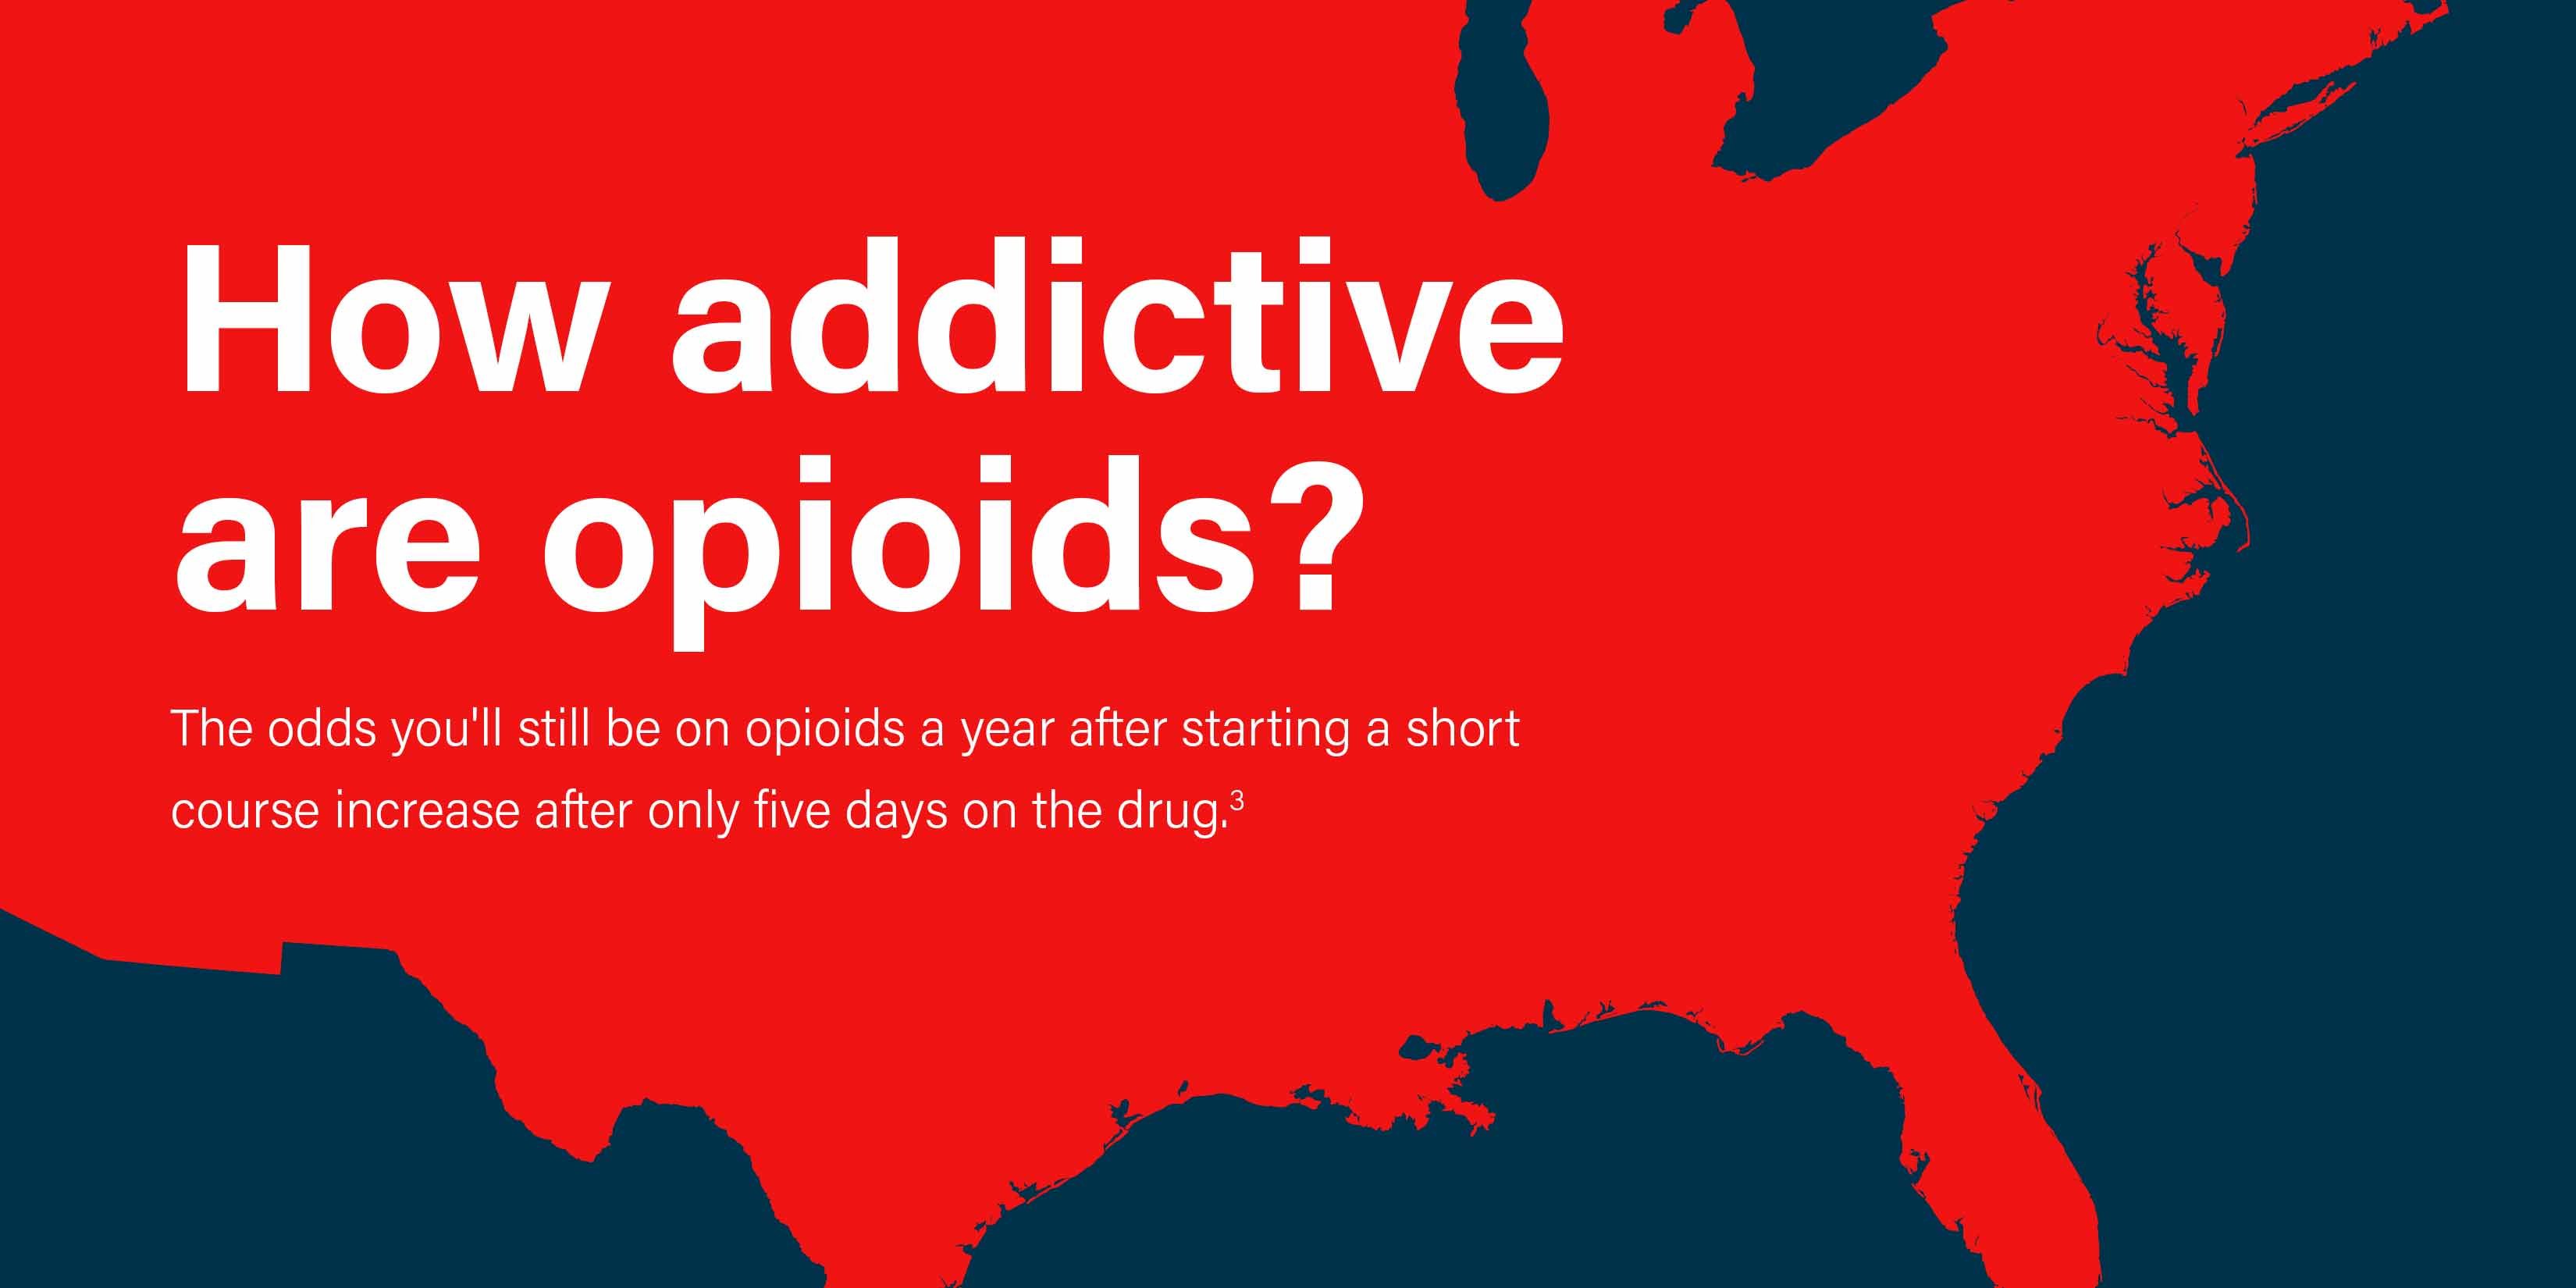 How addictive are opioids? The odds you'll still be on opioids a year after starting a short course increase after only five days on the drug.[3]